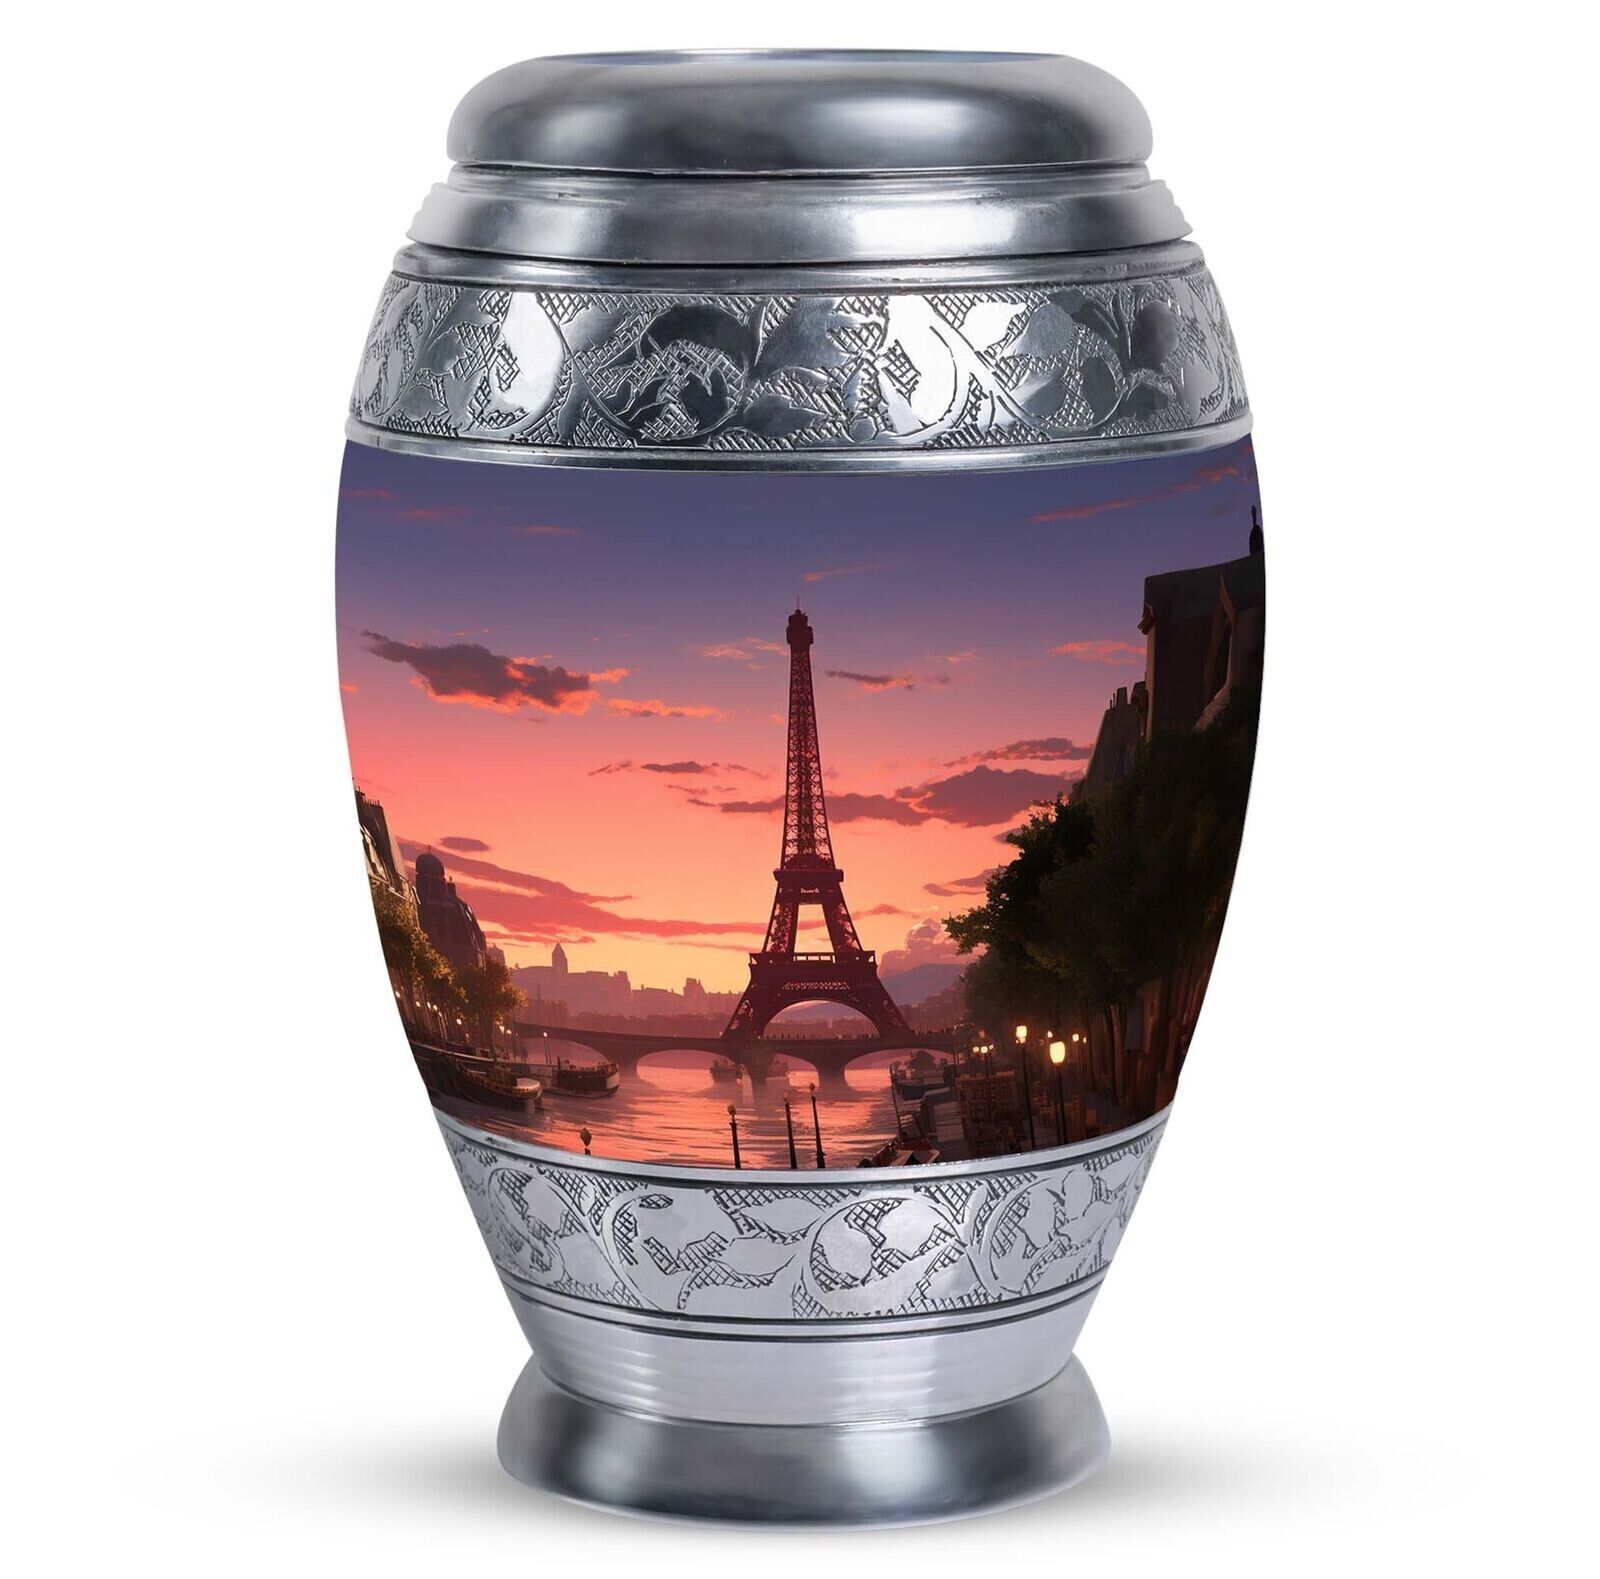 Handmade Eiffel Tower Pink View (10 Inch) Engraved For Human Ash Funeral Burial